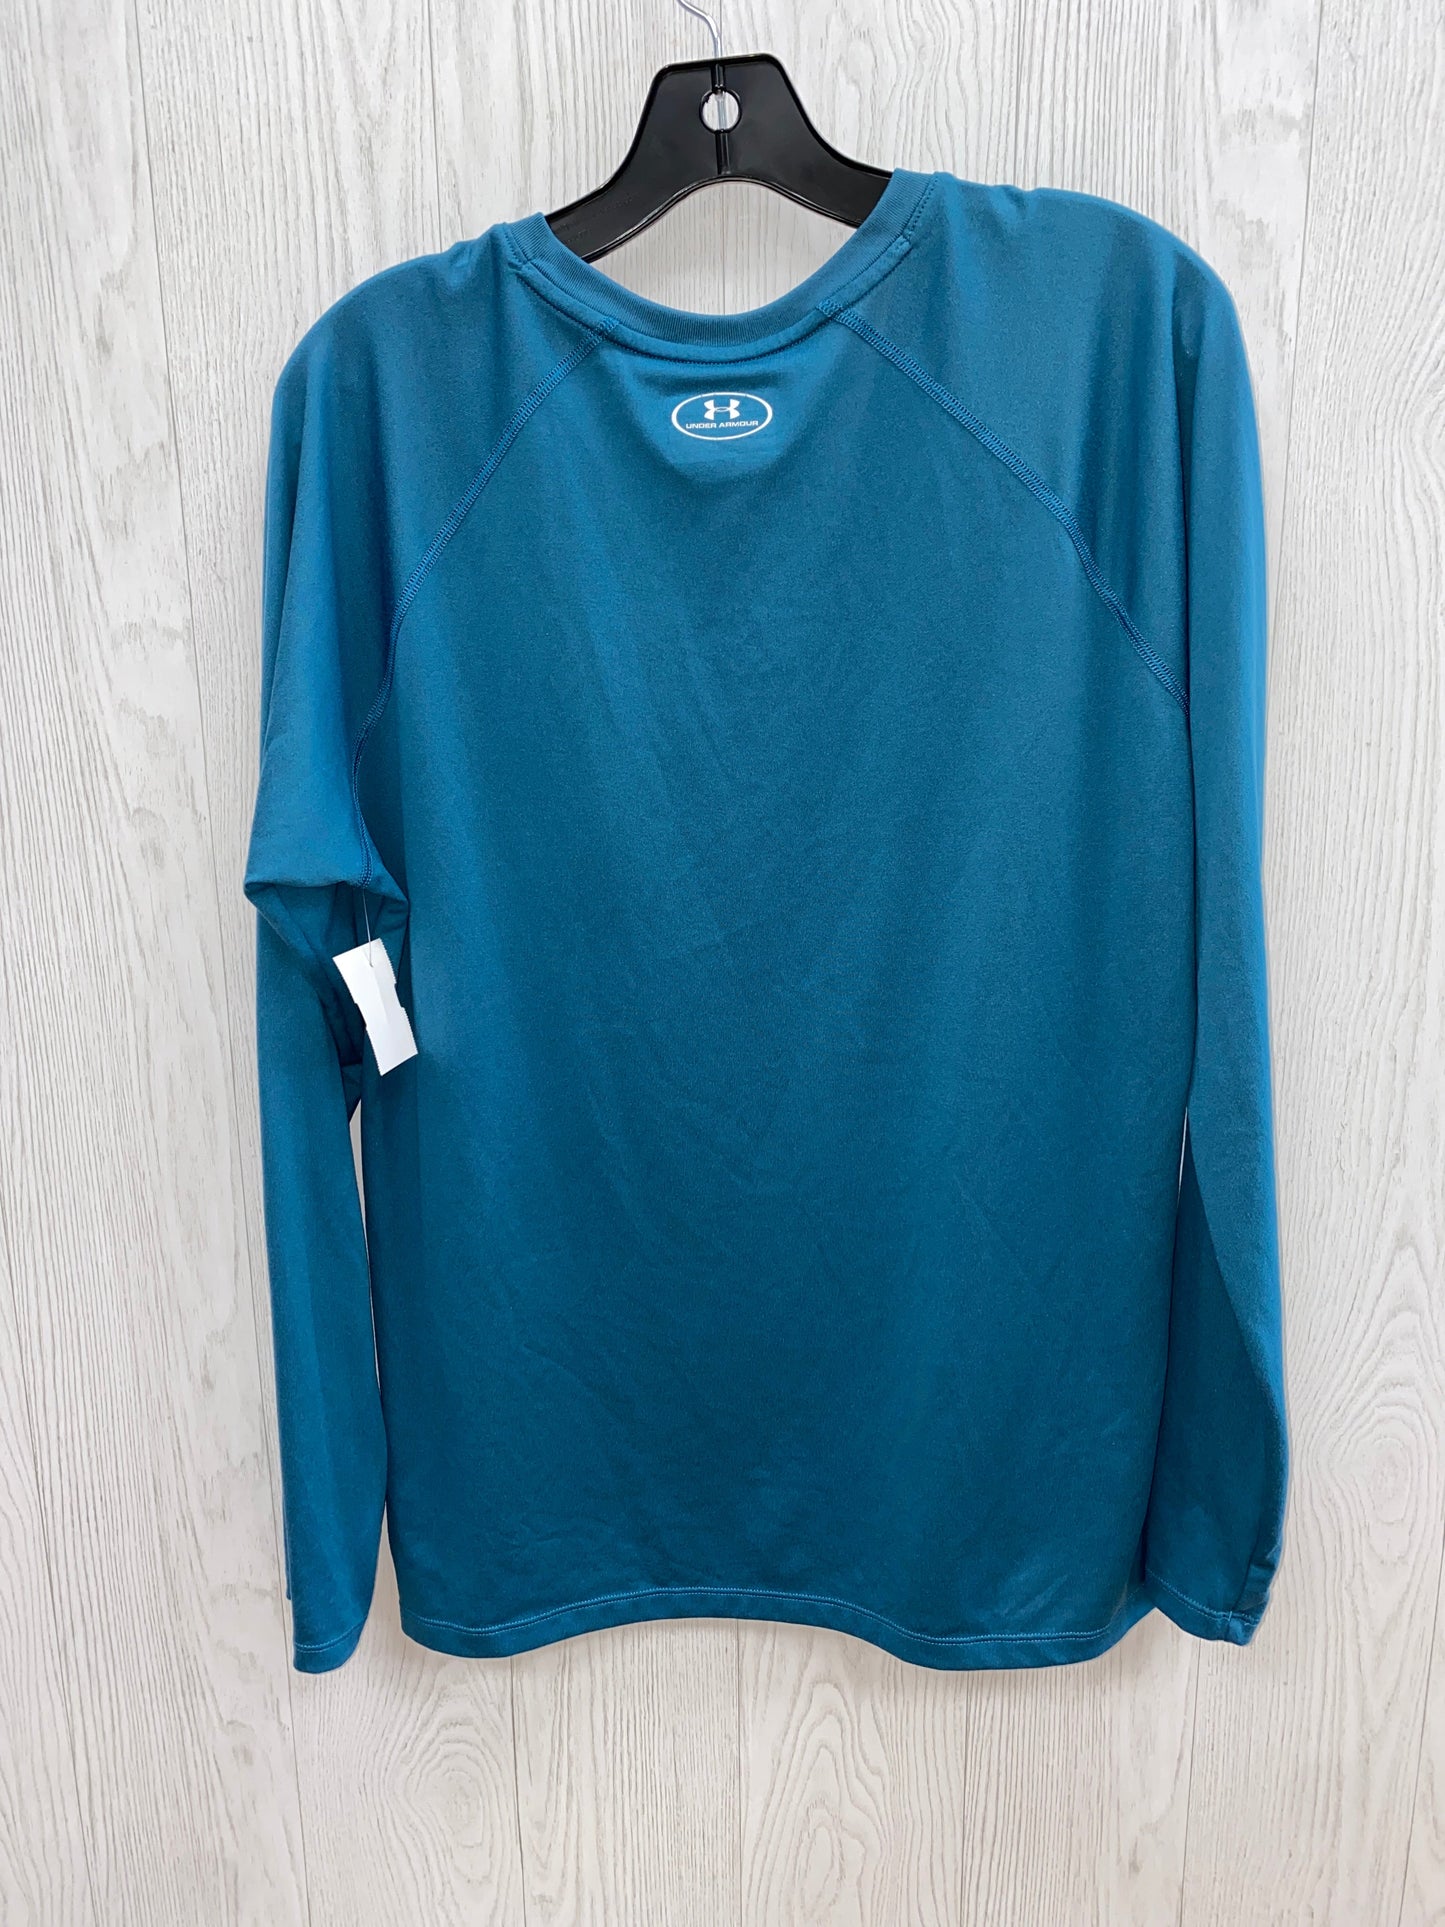 Top Long Sleeve By Under Armour  Size: Xl